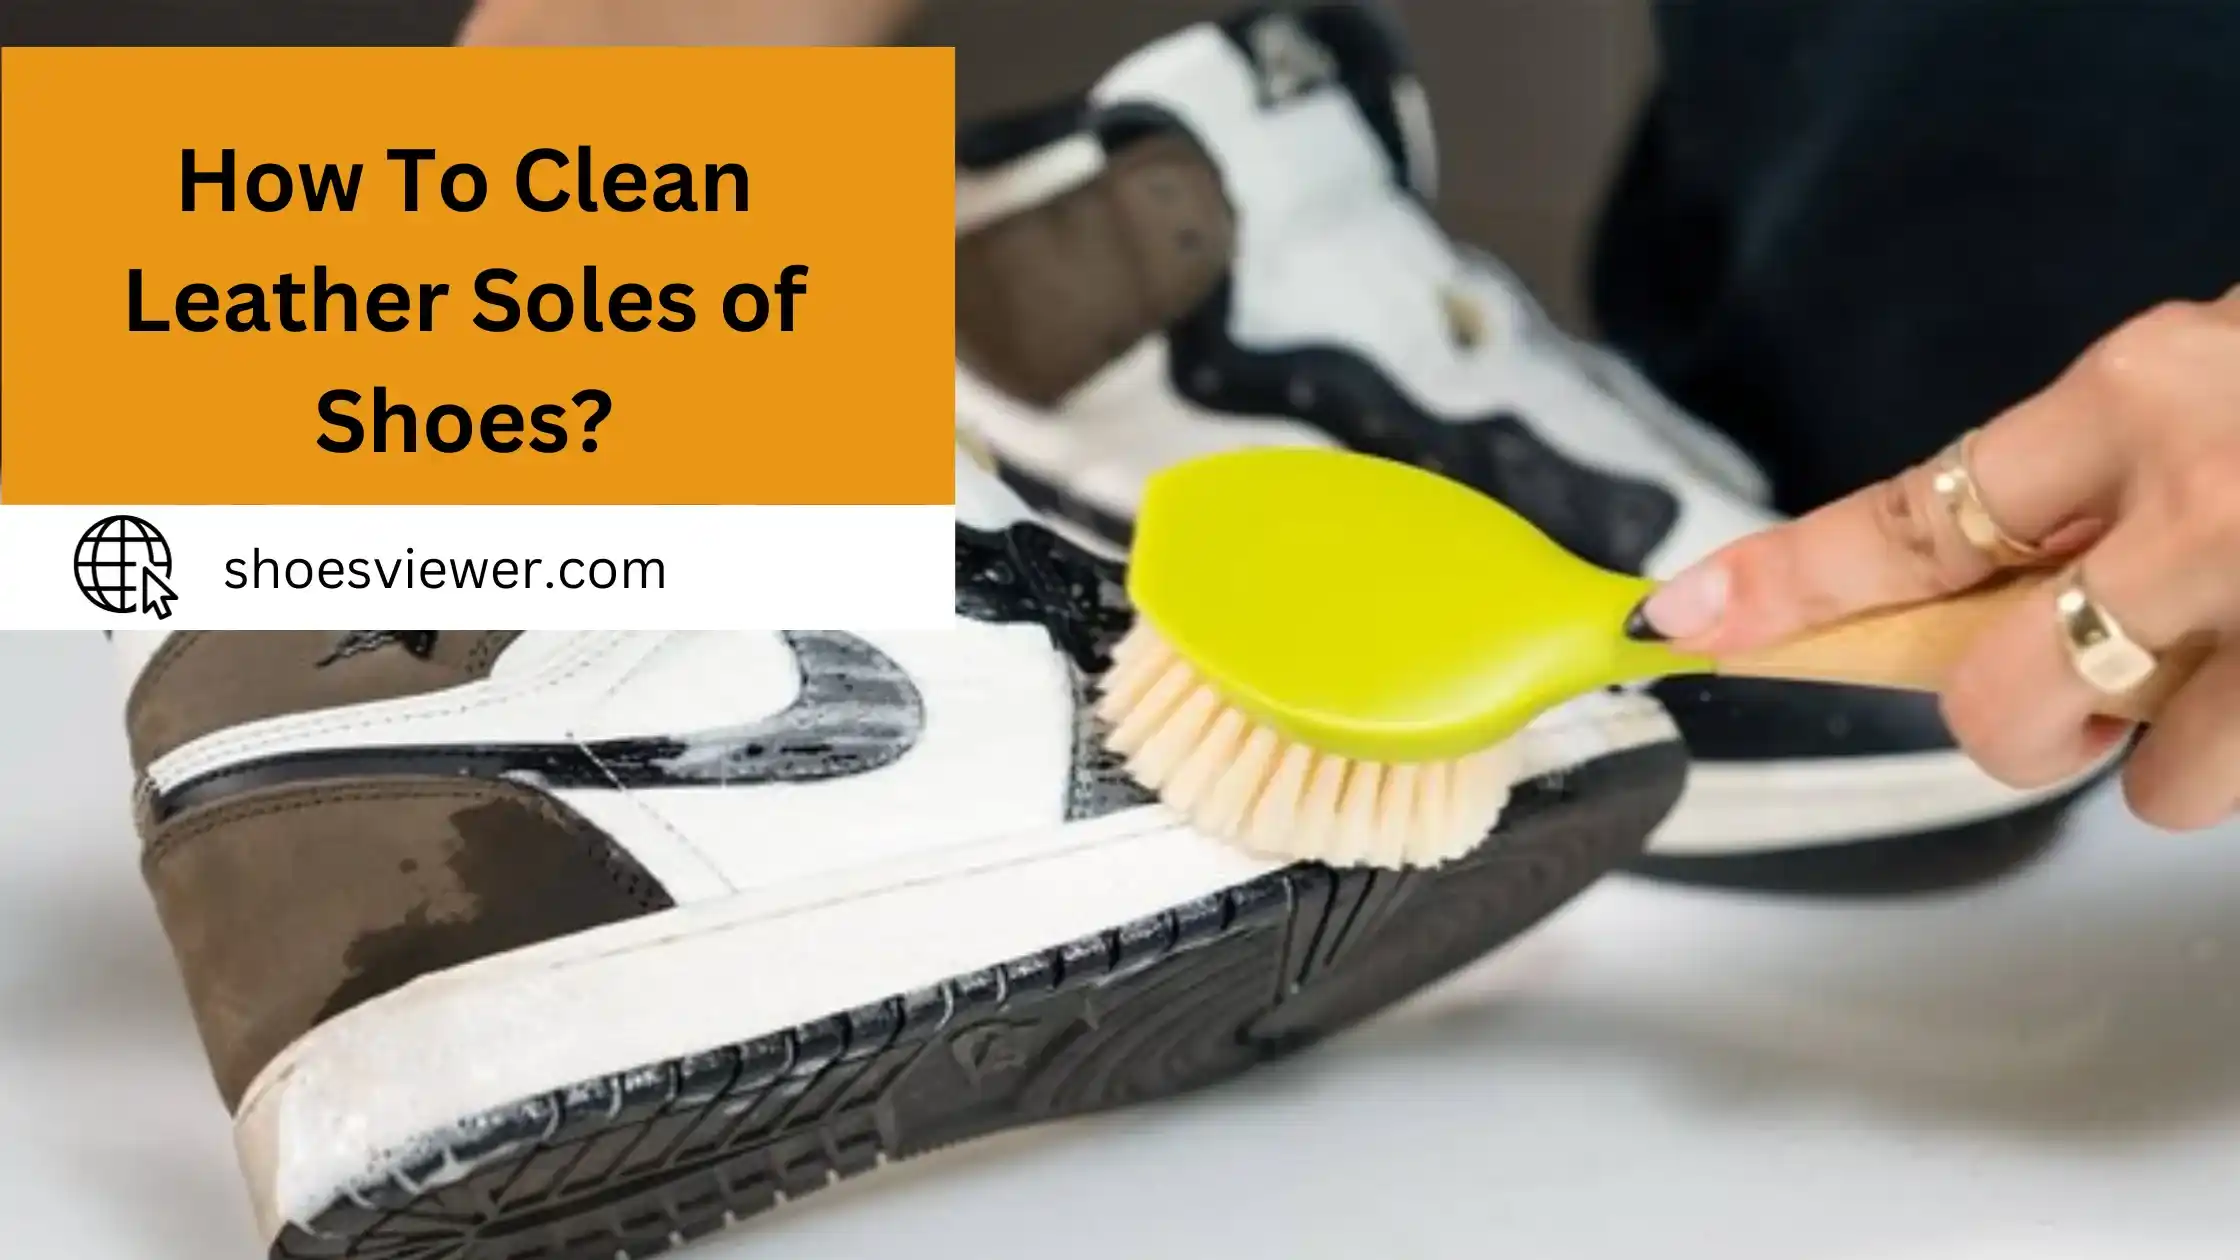 How To Clean Leather Soles of Shoes? Cleaning Instructions